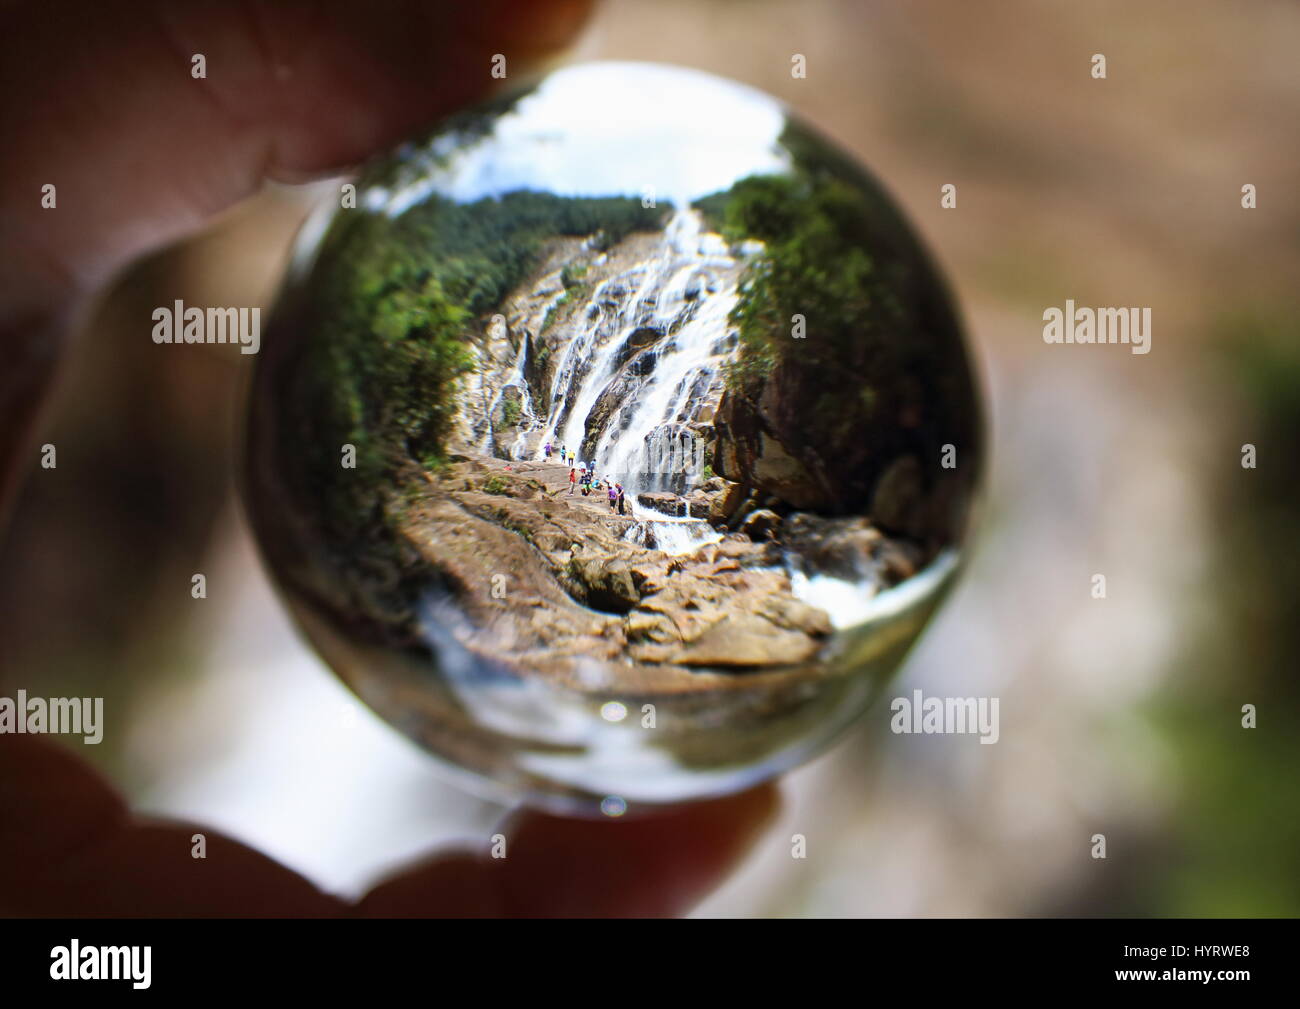 Glass ball photography with an image of the cascading Chemerong Waterfall in Terengganu, Malaysia taken inside the glass ball. Stock Photo